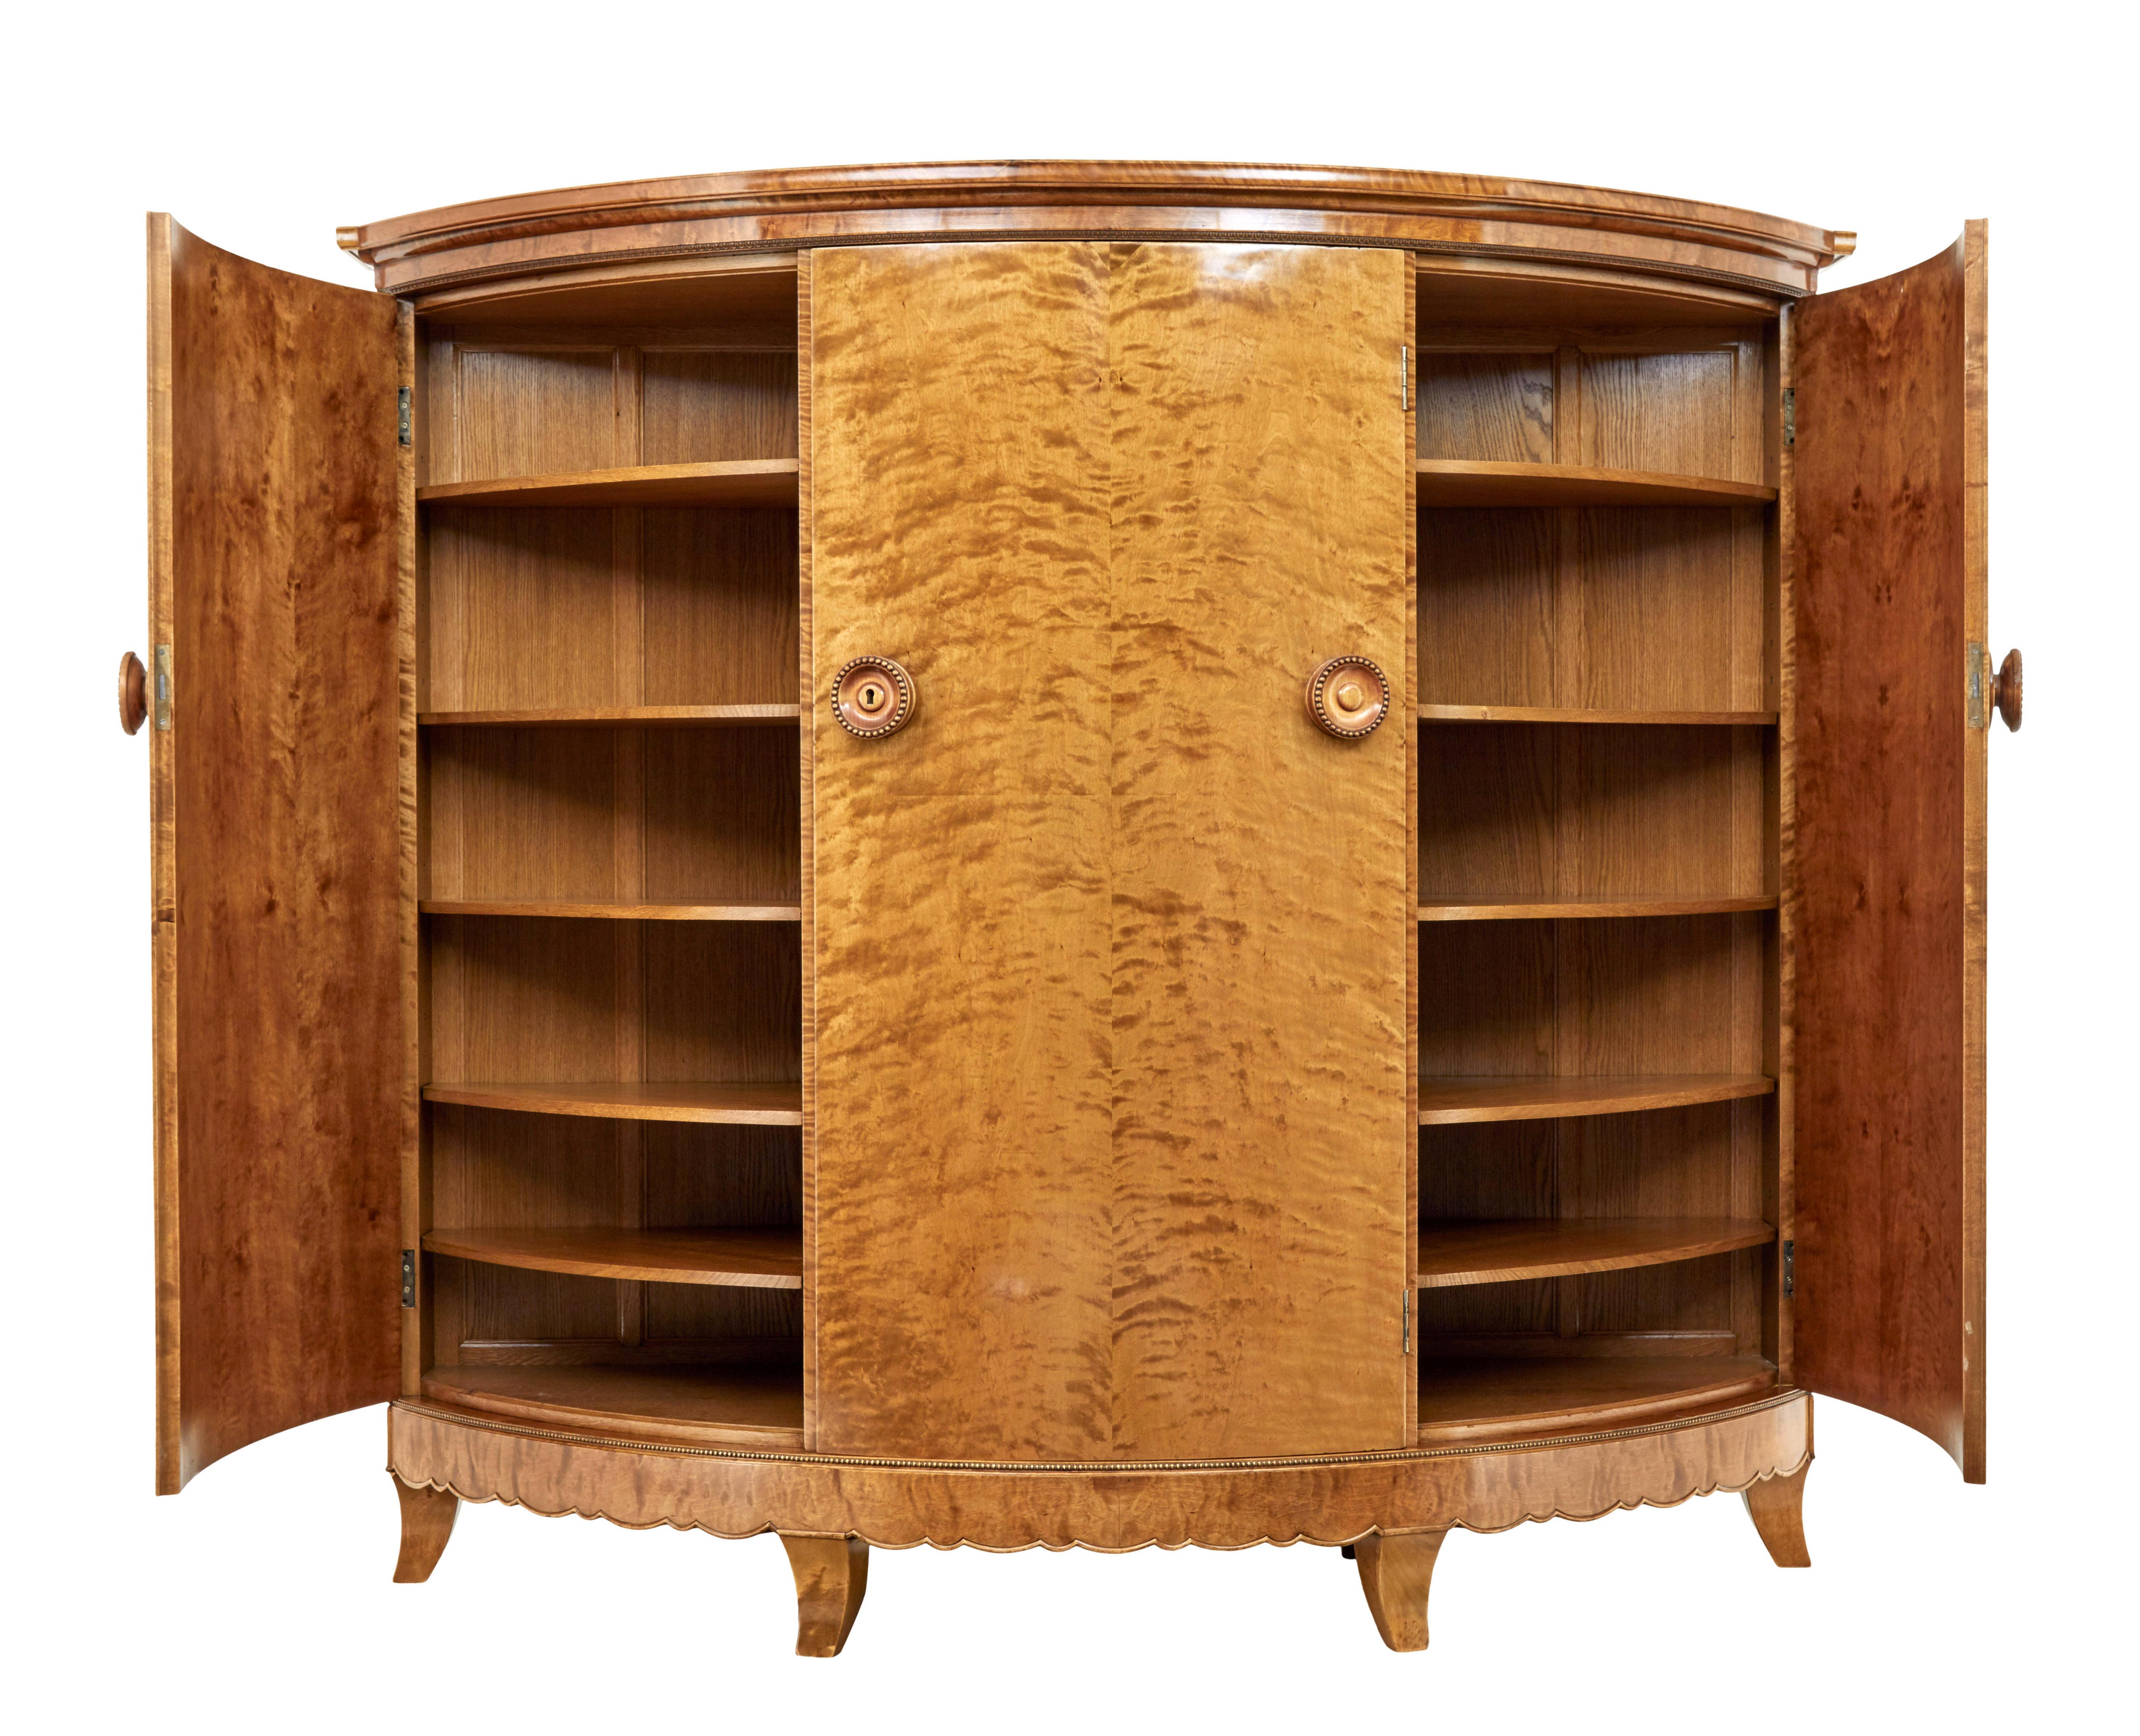 Rare 1930's birch cabinet of grand proportions Otto Schulz for boet.

We are pleased to offer this piece designed by German designer otto schulz for swedish company boet.  This piece is certainly a special commission as boet tended to be known for